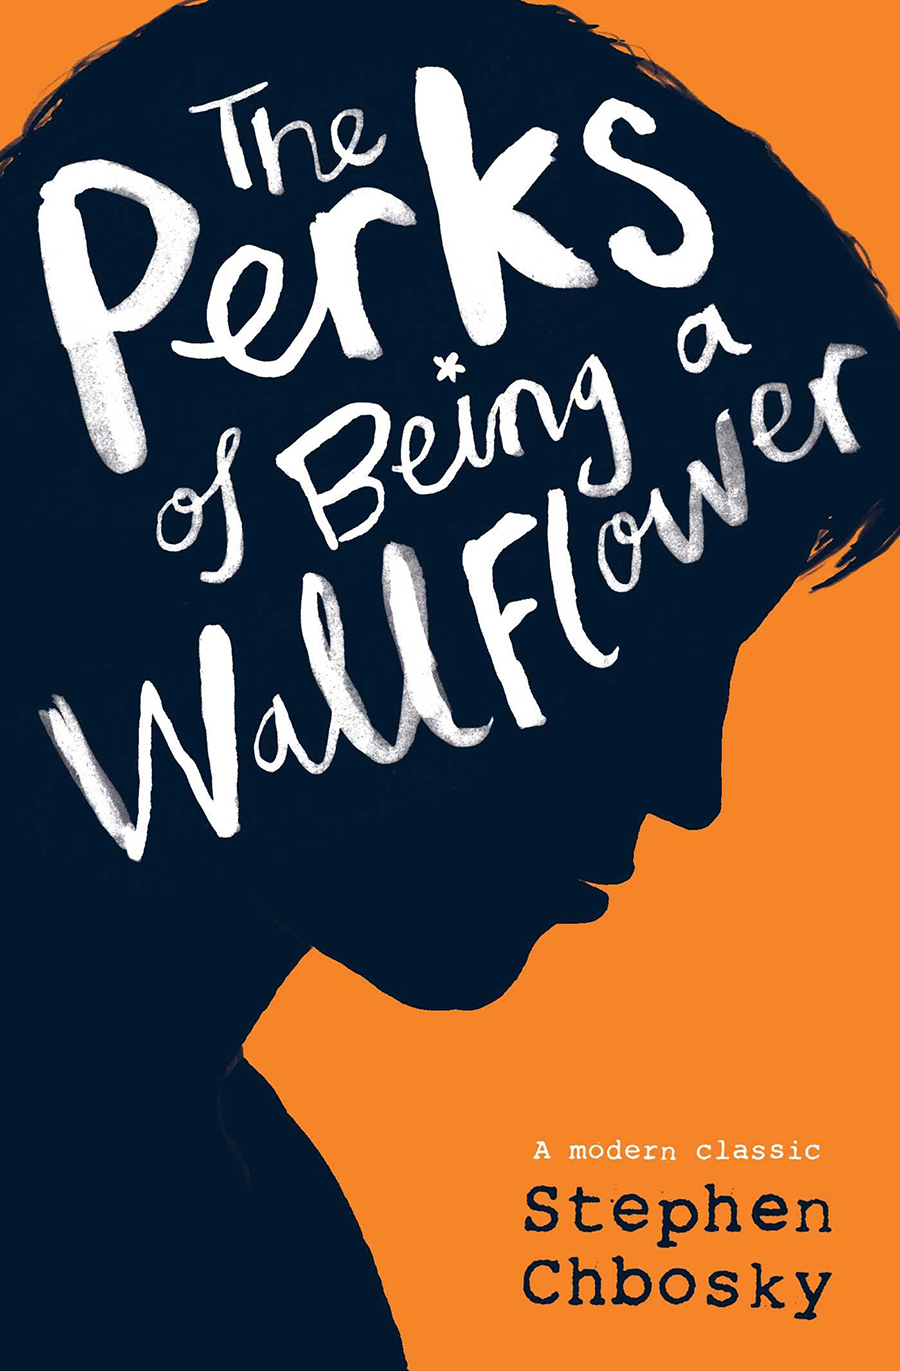 The Perks of Being a Wallflower by Stephen Chbosky - 9781847394071 - Dymocks